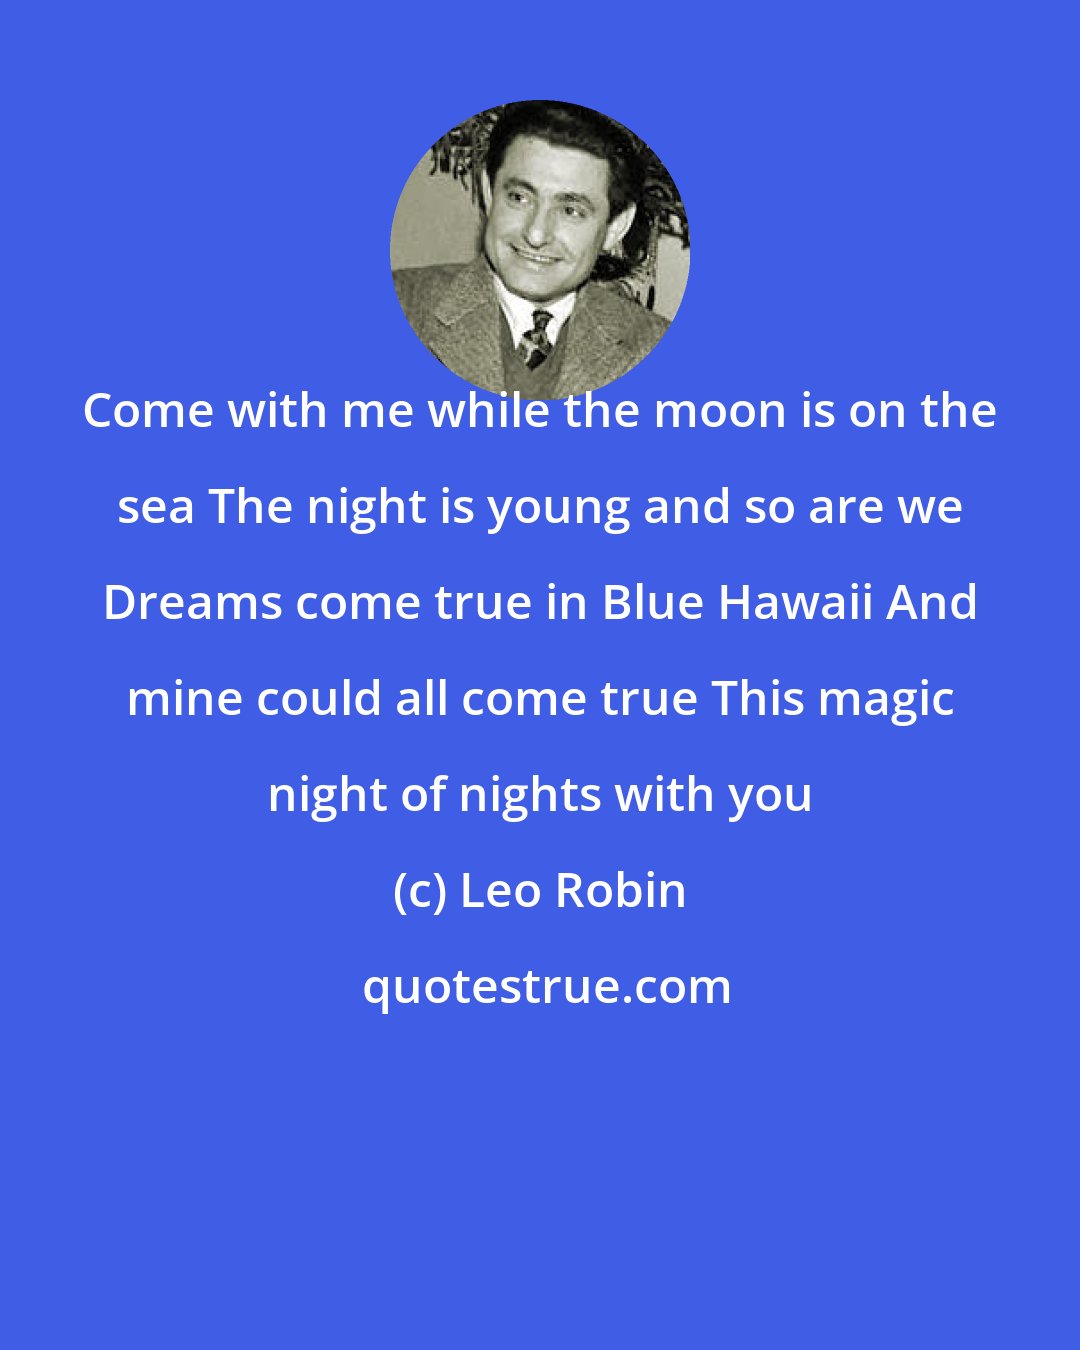 Leo Robin: Come with me while the moon is on the sea The night is young and so are we Dreams come true in Blue Hawaii And mine could all come true This magic night of nights with you